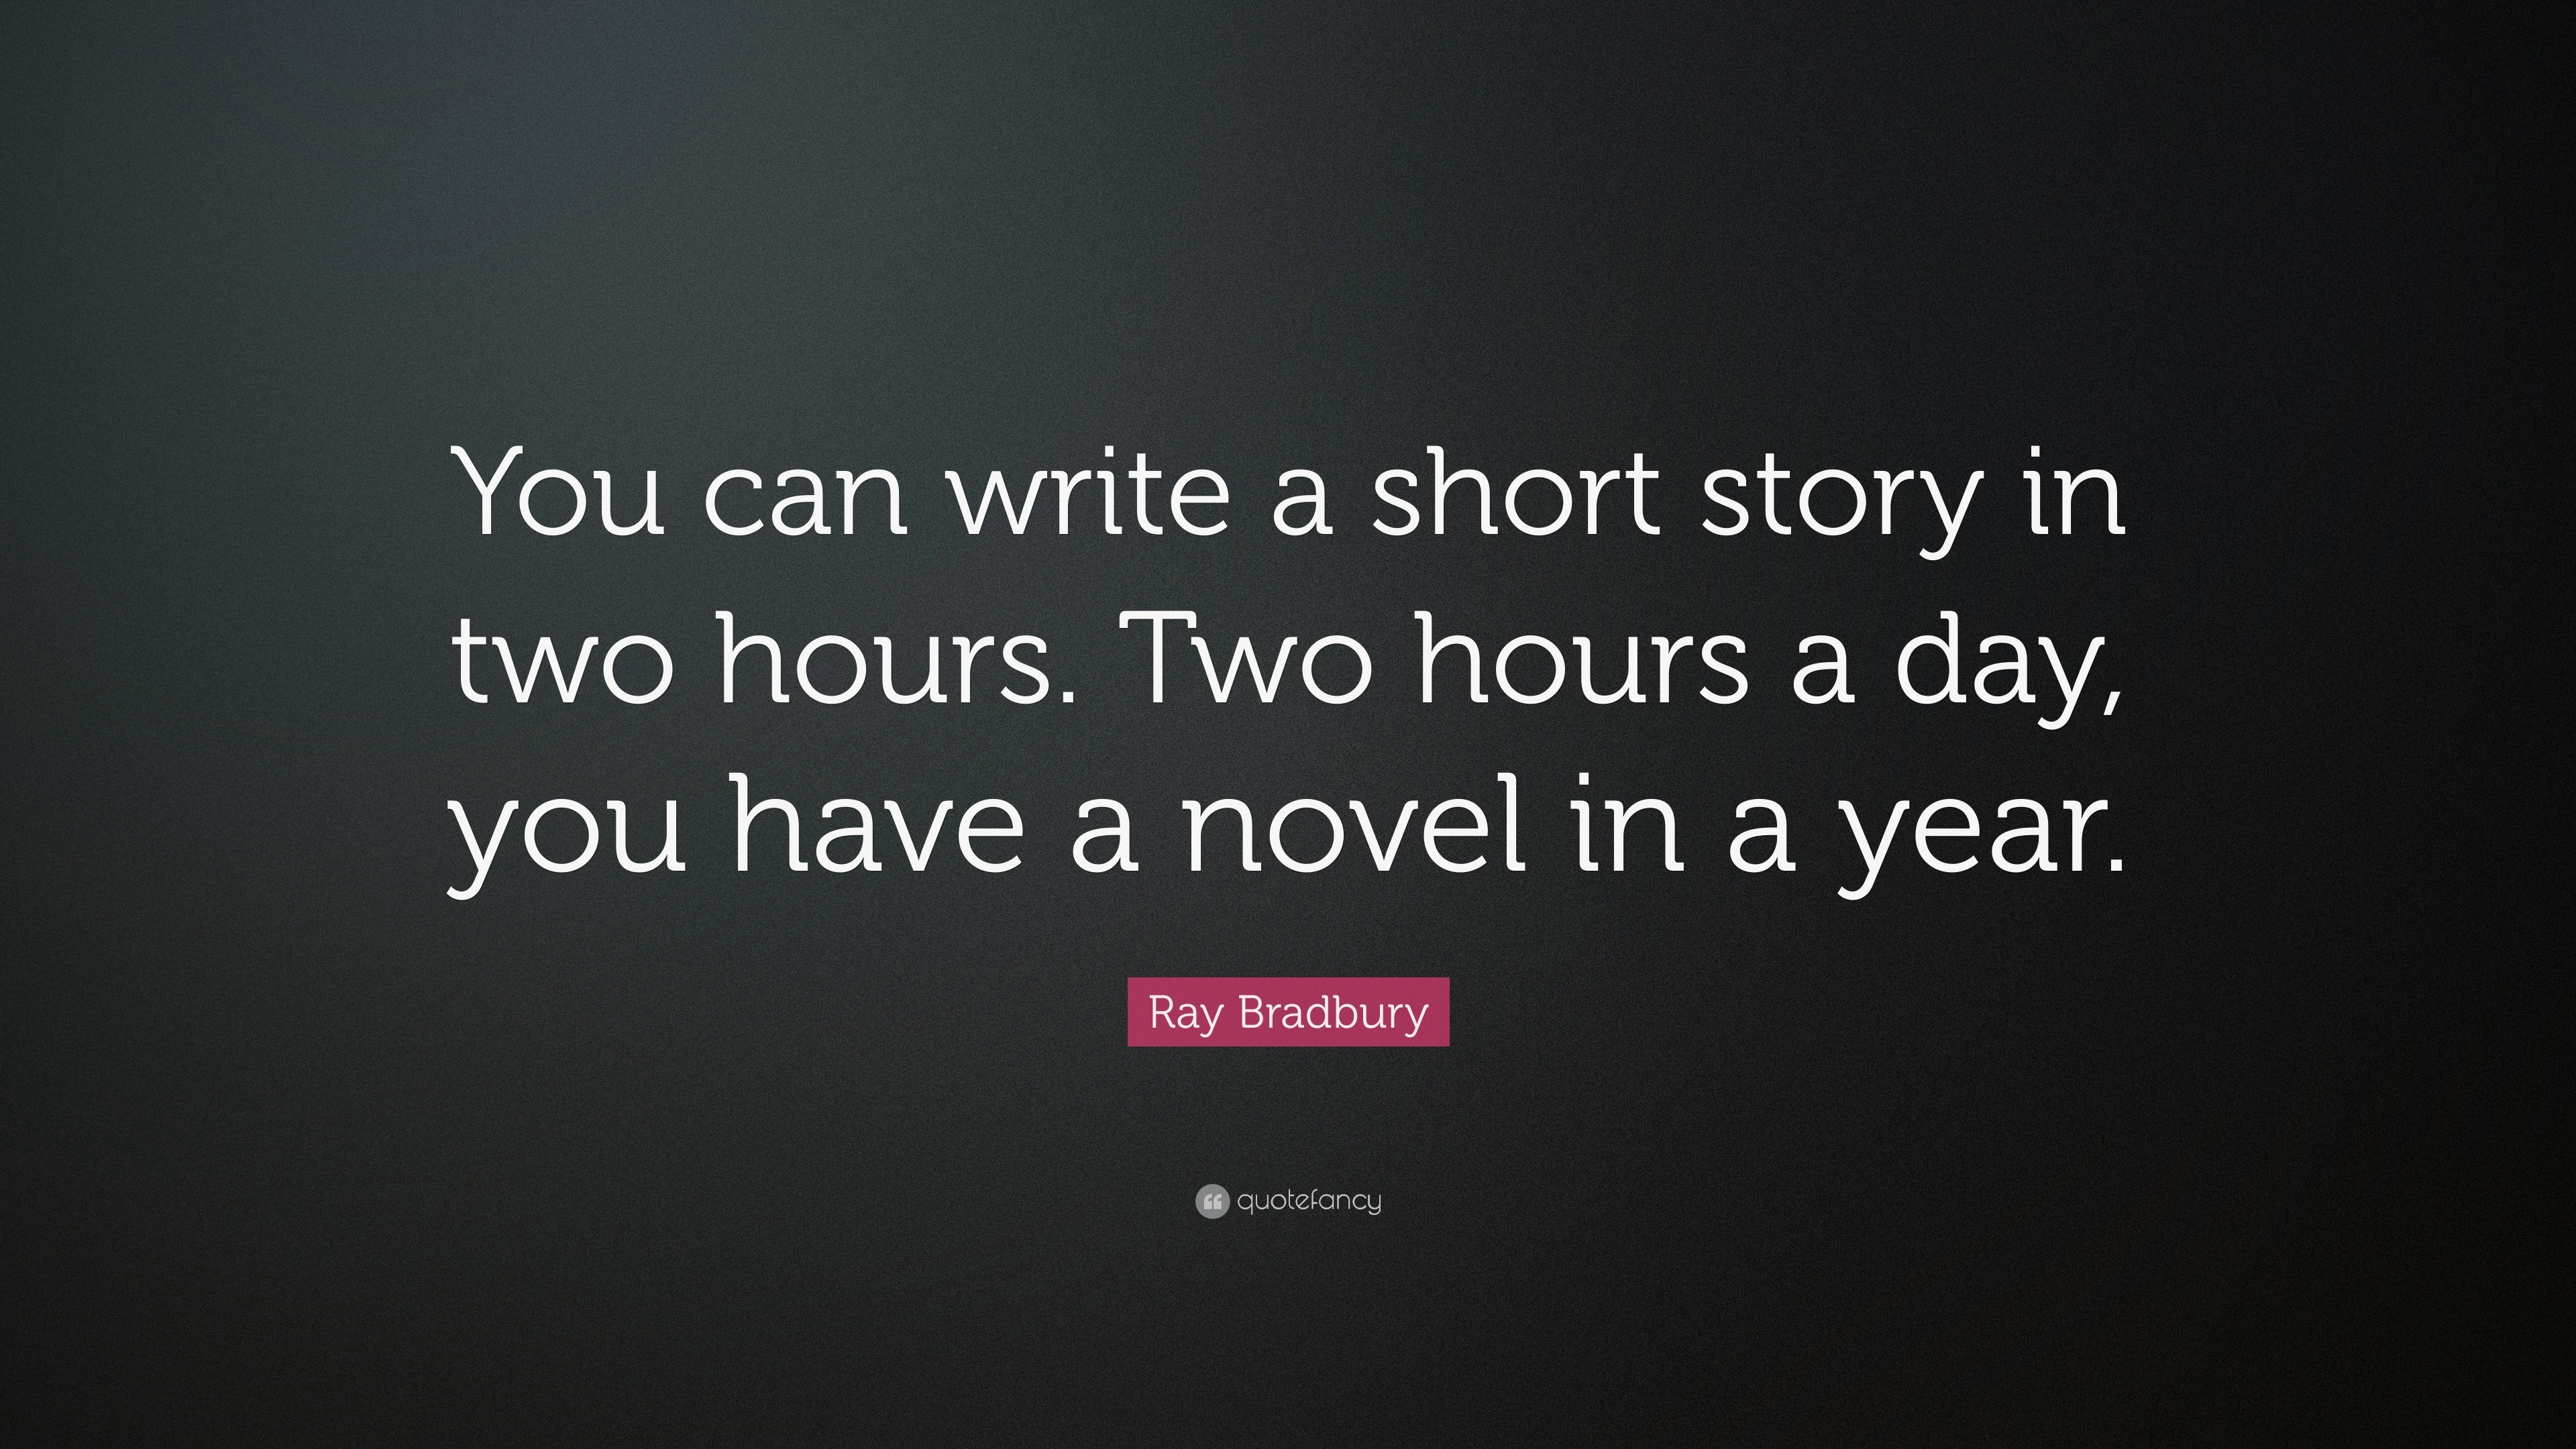 Ray Bradbury Quote: “You can write a short story in two hours. Two